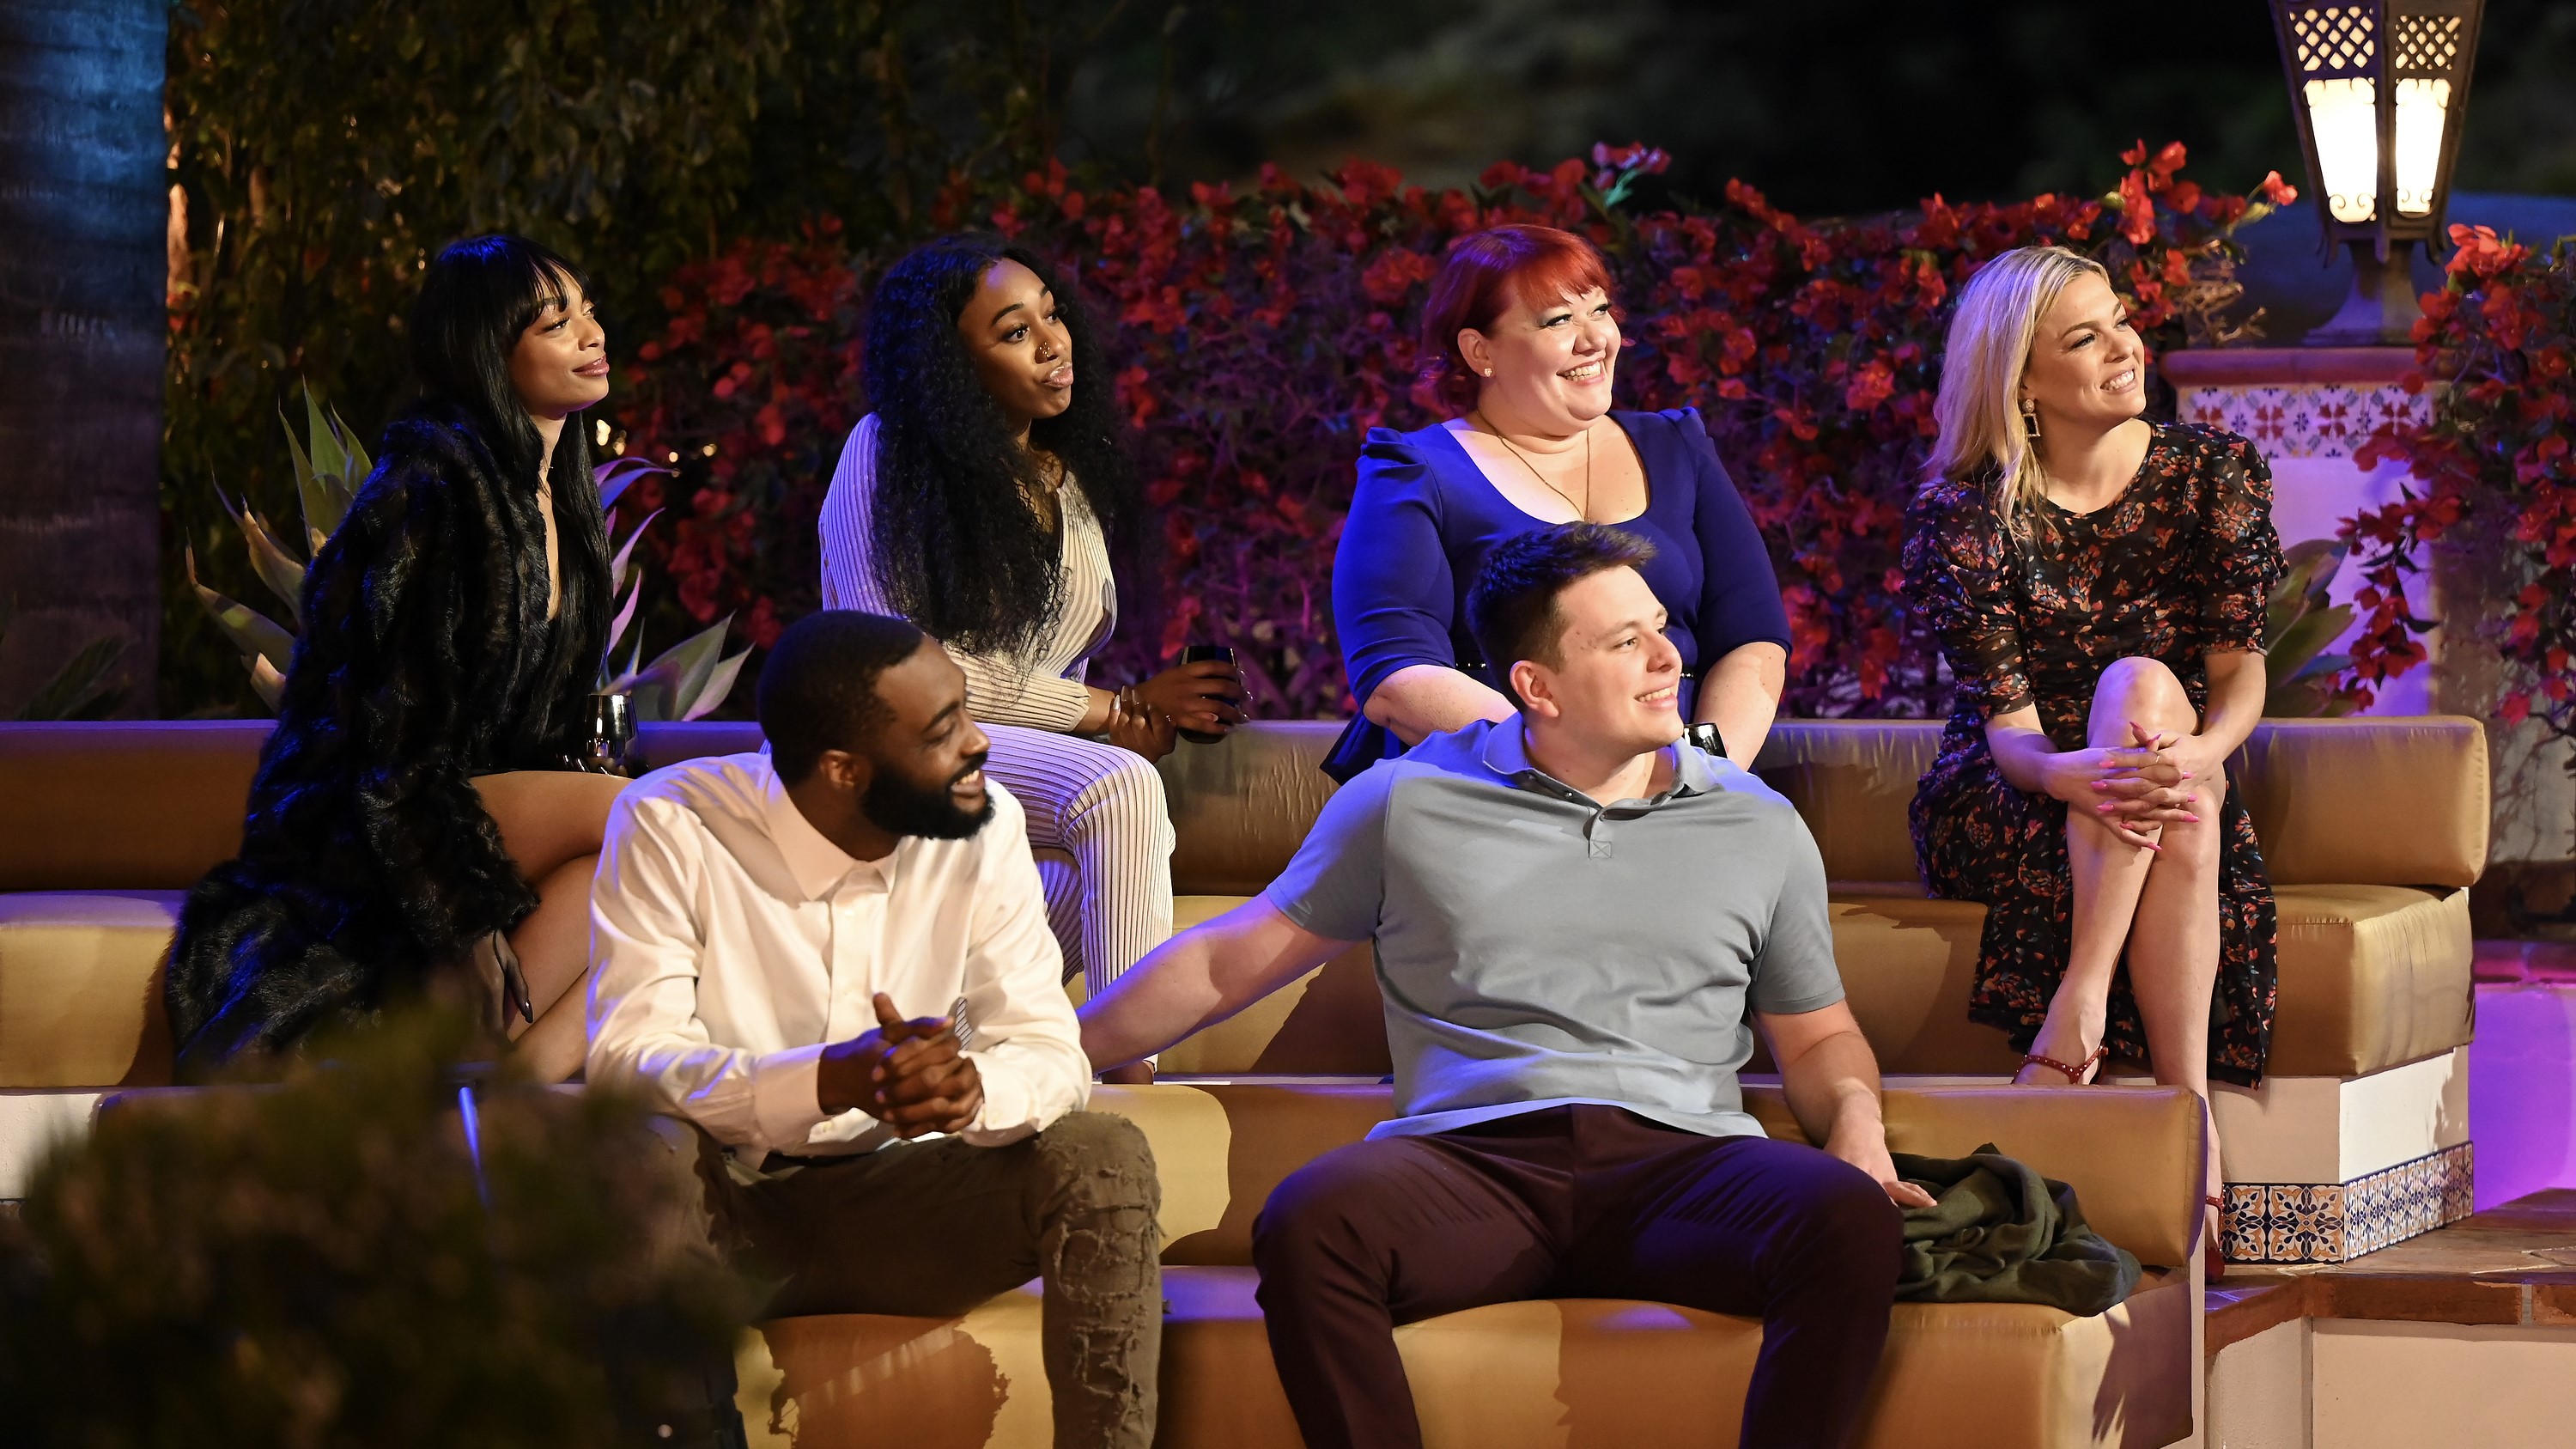 Claim to Fame season 2 cast show clues, theories on…